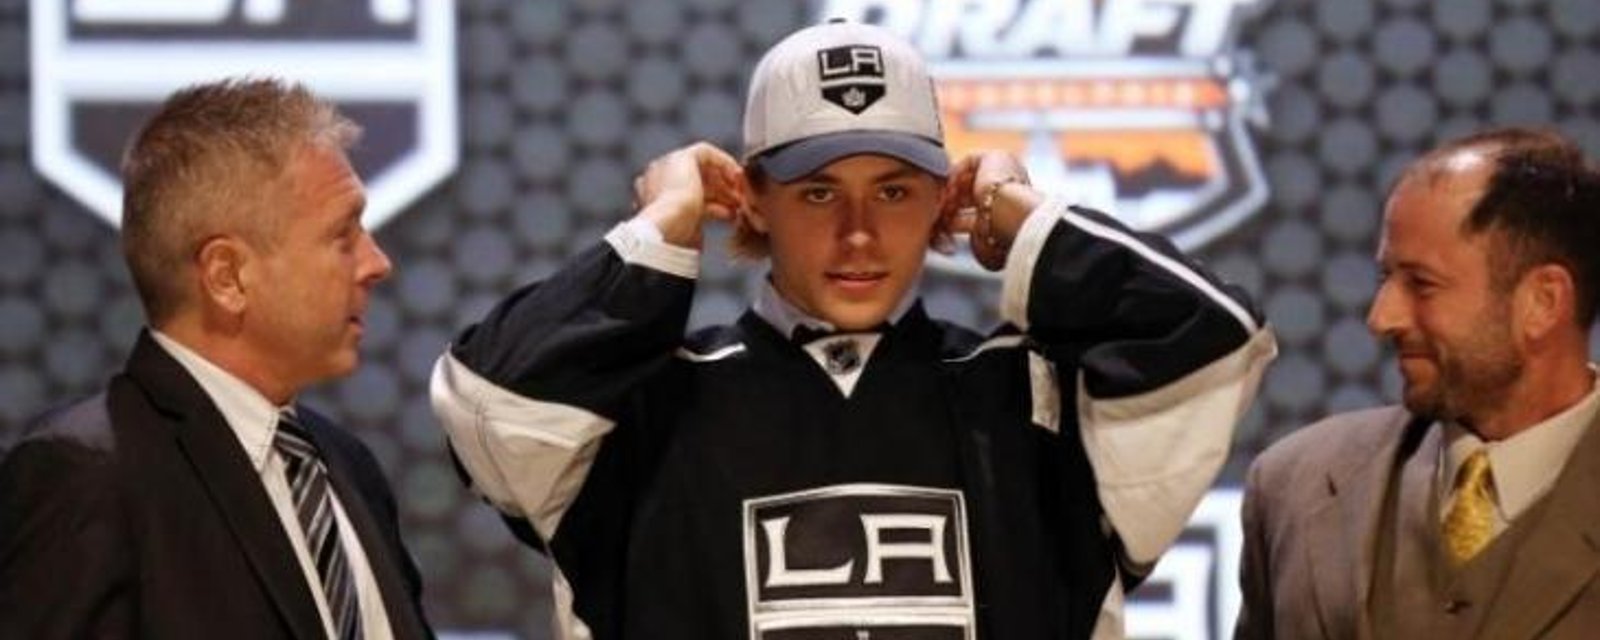 Can Adrian Kempe become the next superstar for the Kings?